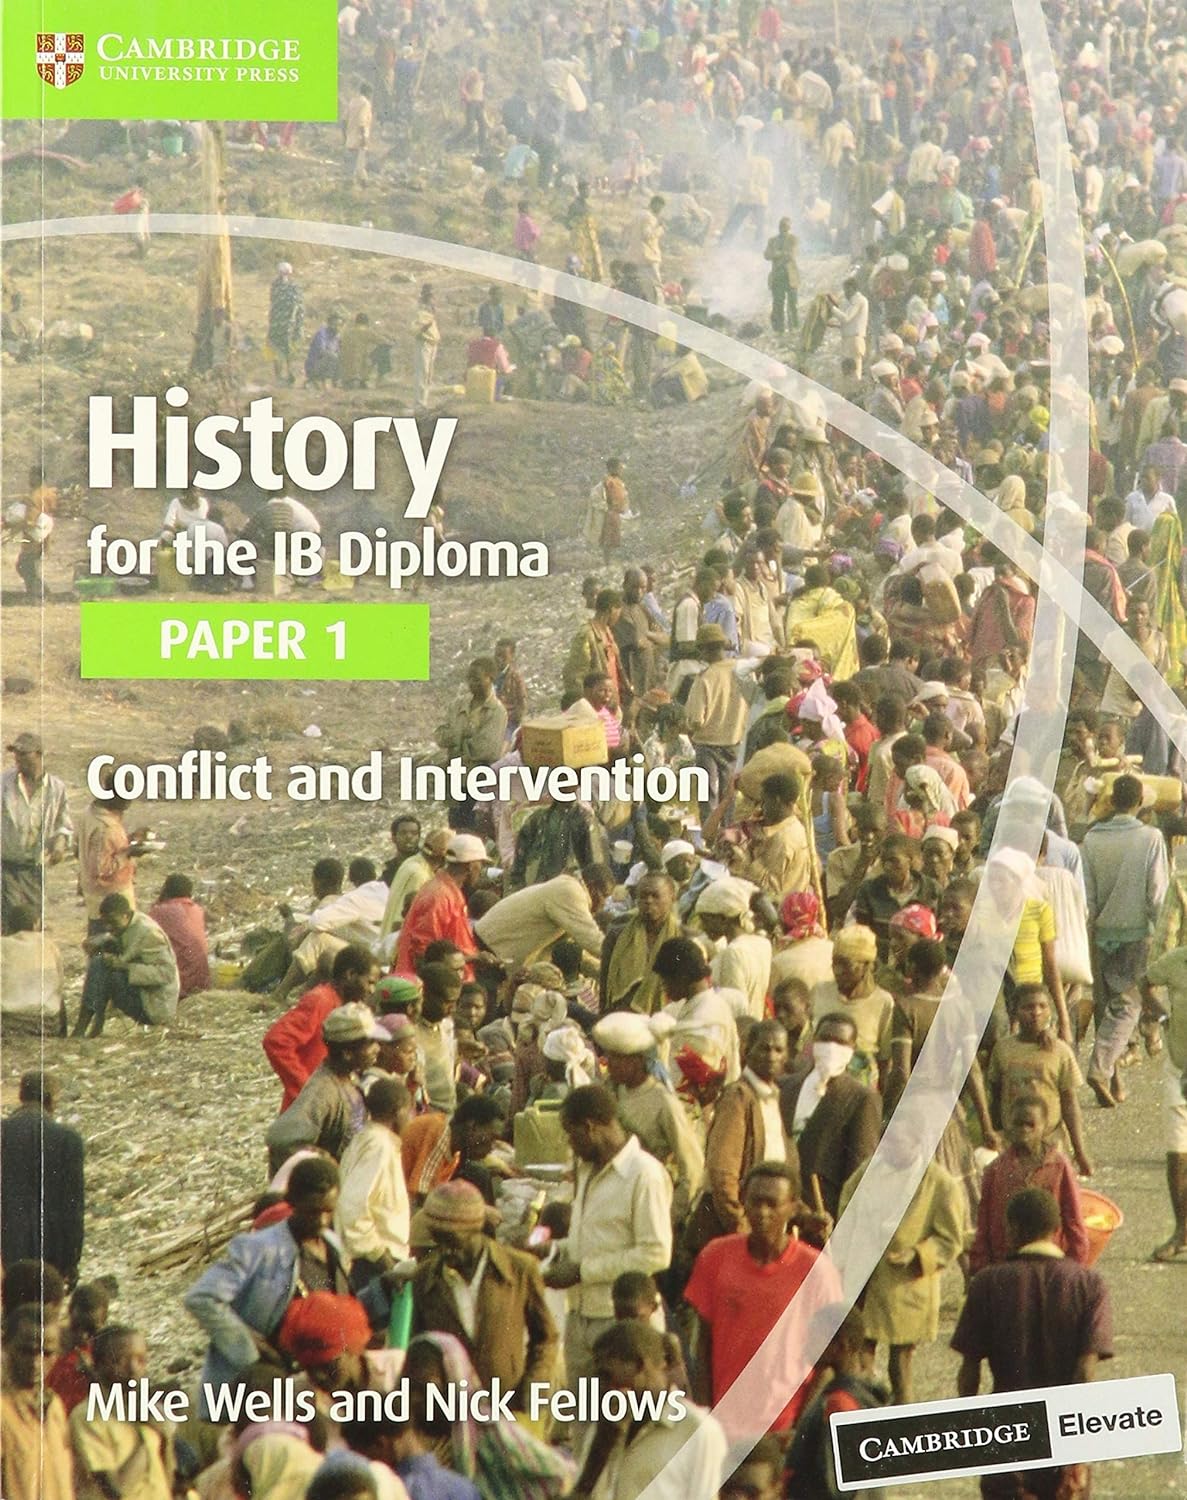 9781107560963, History for the IB Diploma Paper 1 Conflict and Intervention